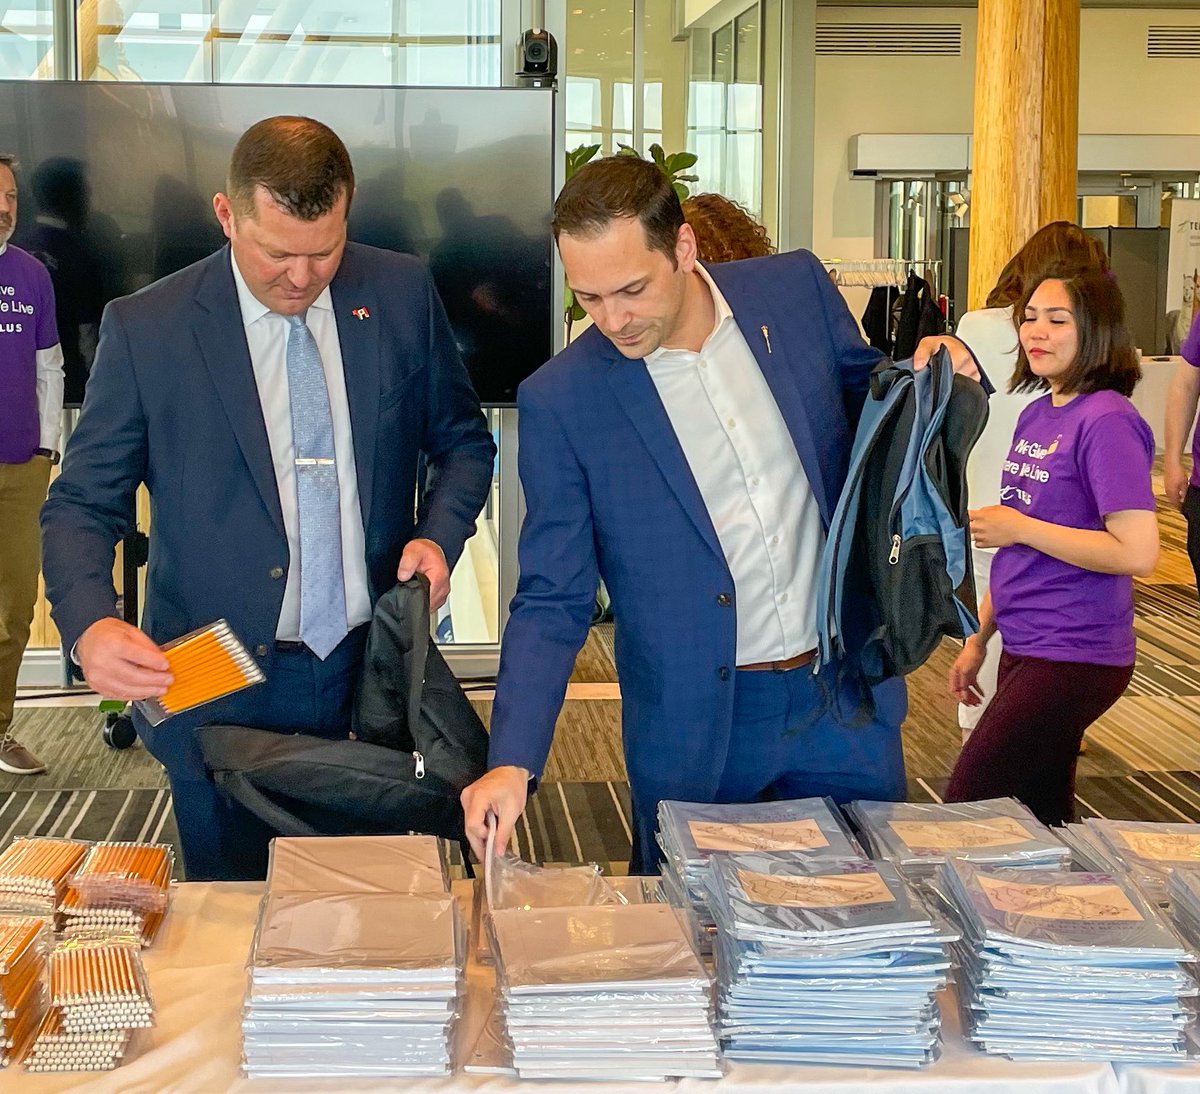 The Telus Kits for Kids program has provided support to families in need since 2006 by supplying essential school supplies to students. This morning I joined my colleagues and other volunteers to put together backpacks for local families including those in Calgary-South East.